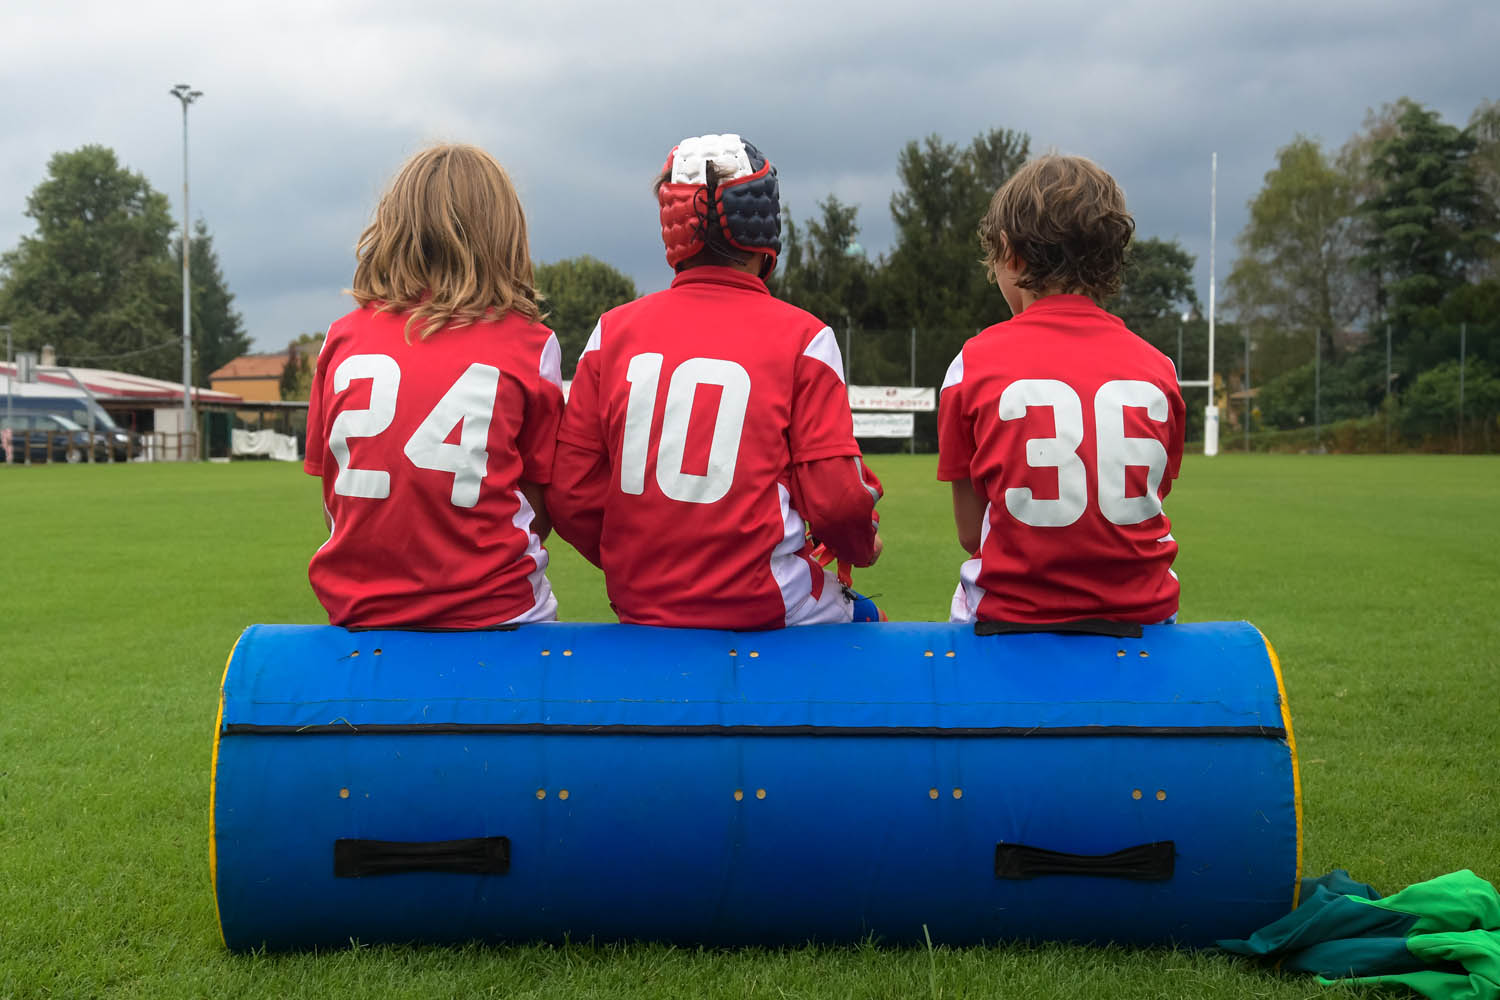 Three children wearing red rugby jerseys sit on post padding with their backs to the camera 